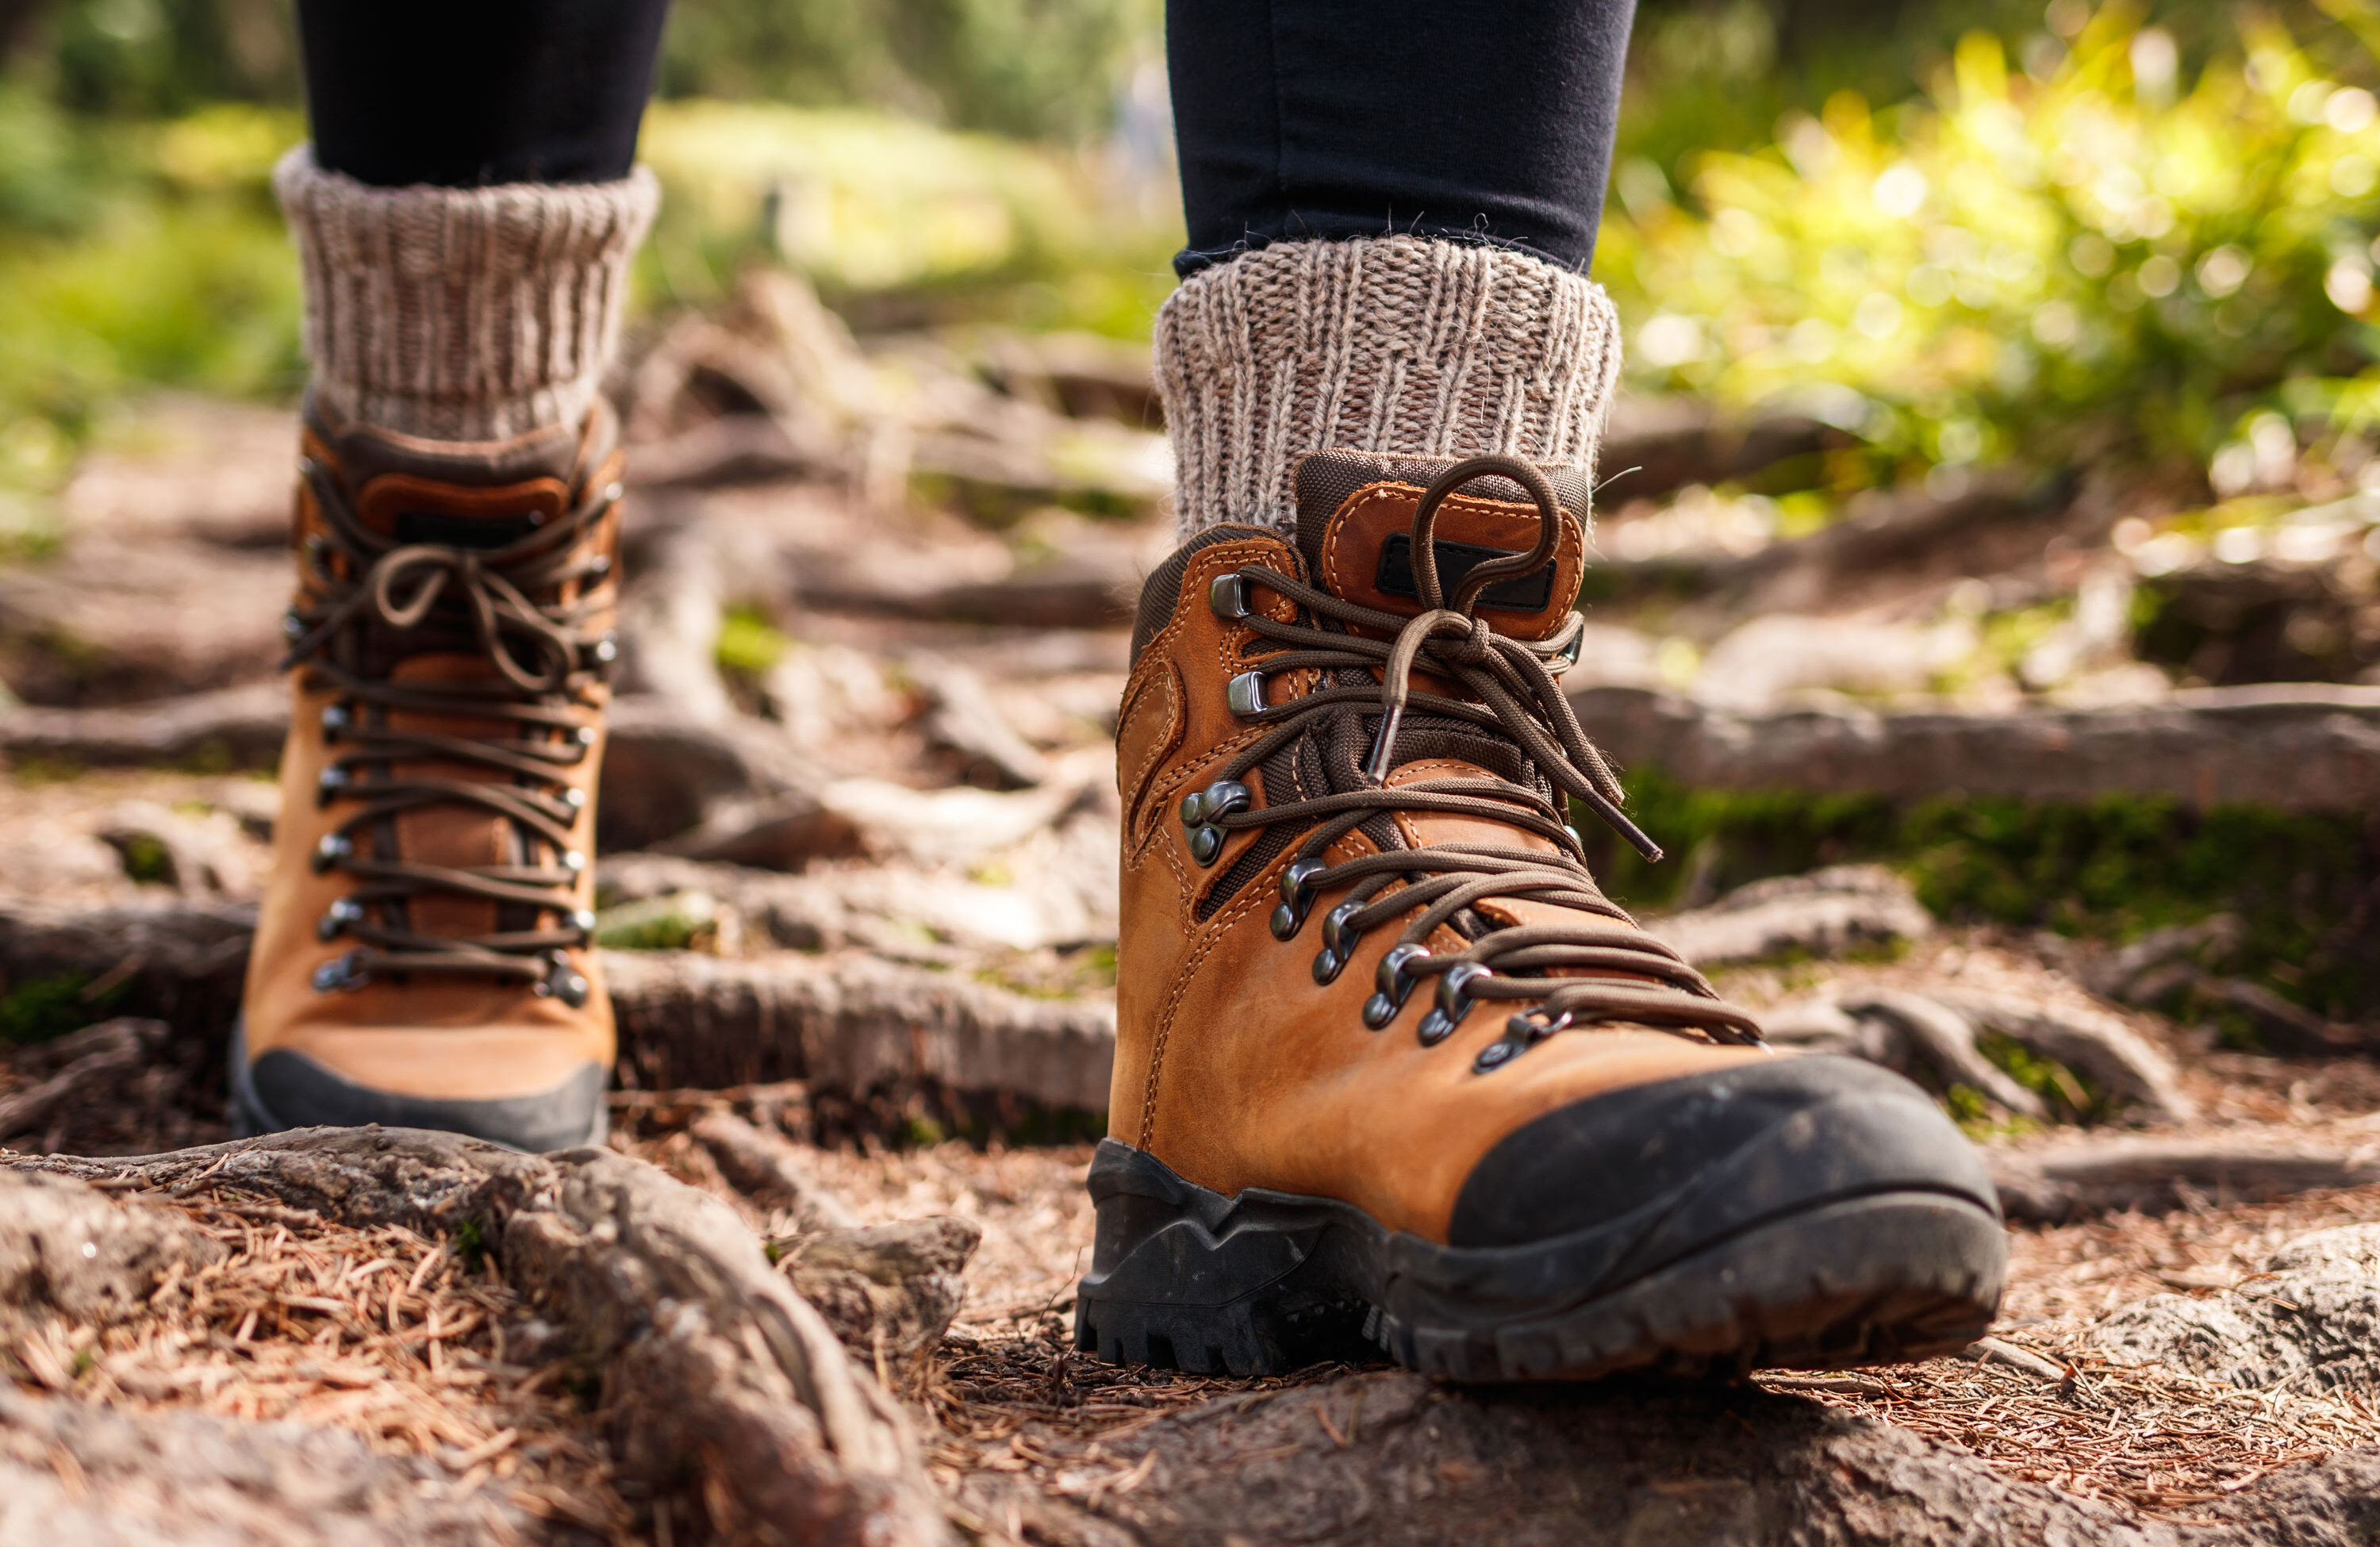 A close up of a woman's walking boots as she hikes over rocky ground